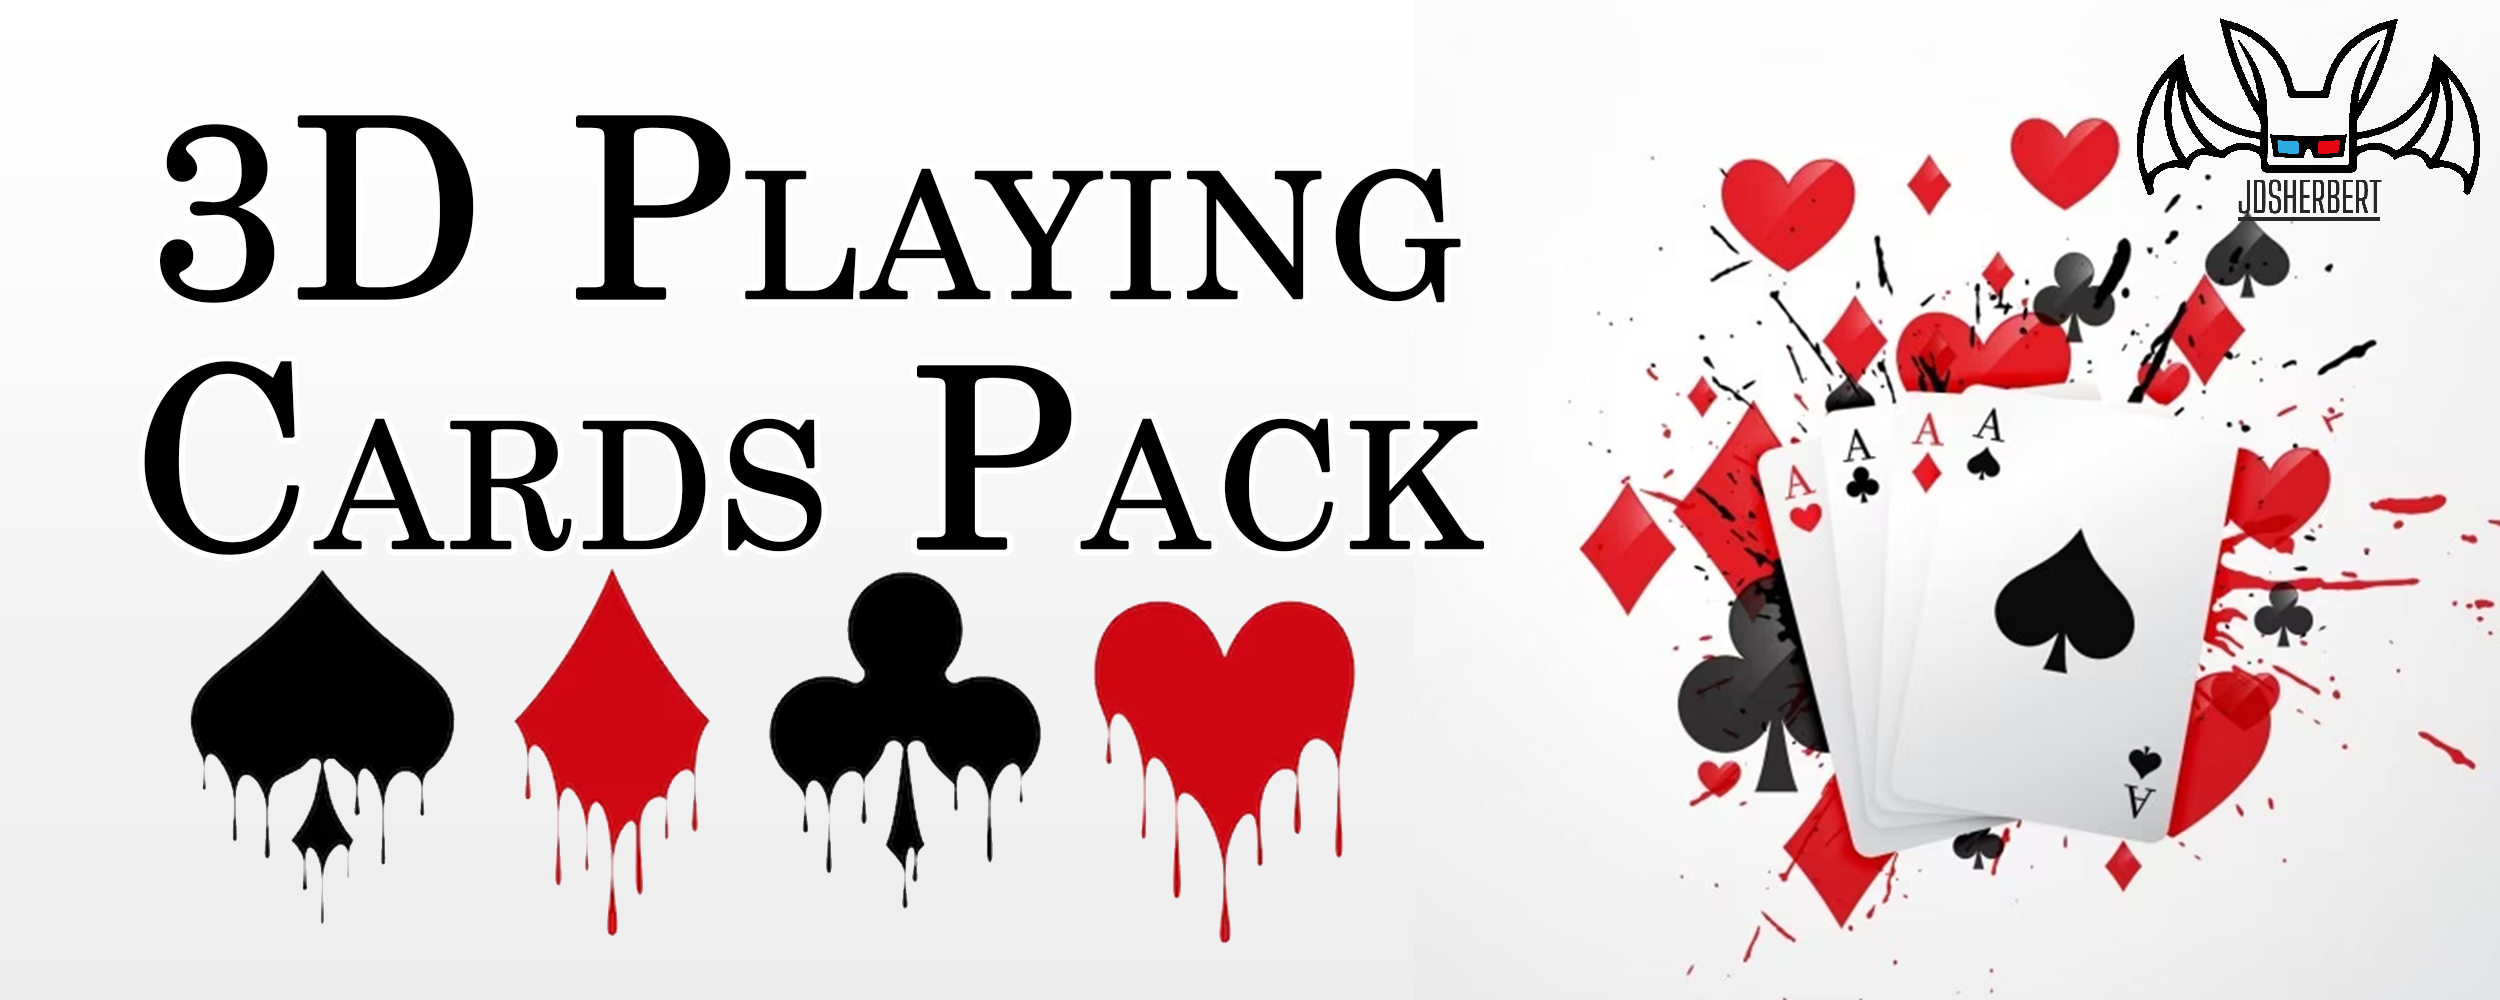 3D Playing Cards Asset Pack ♣️♠️♦️♥️